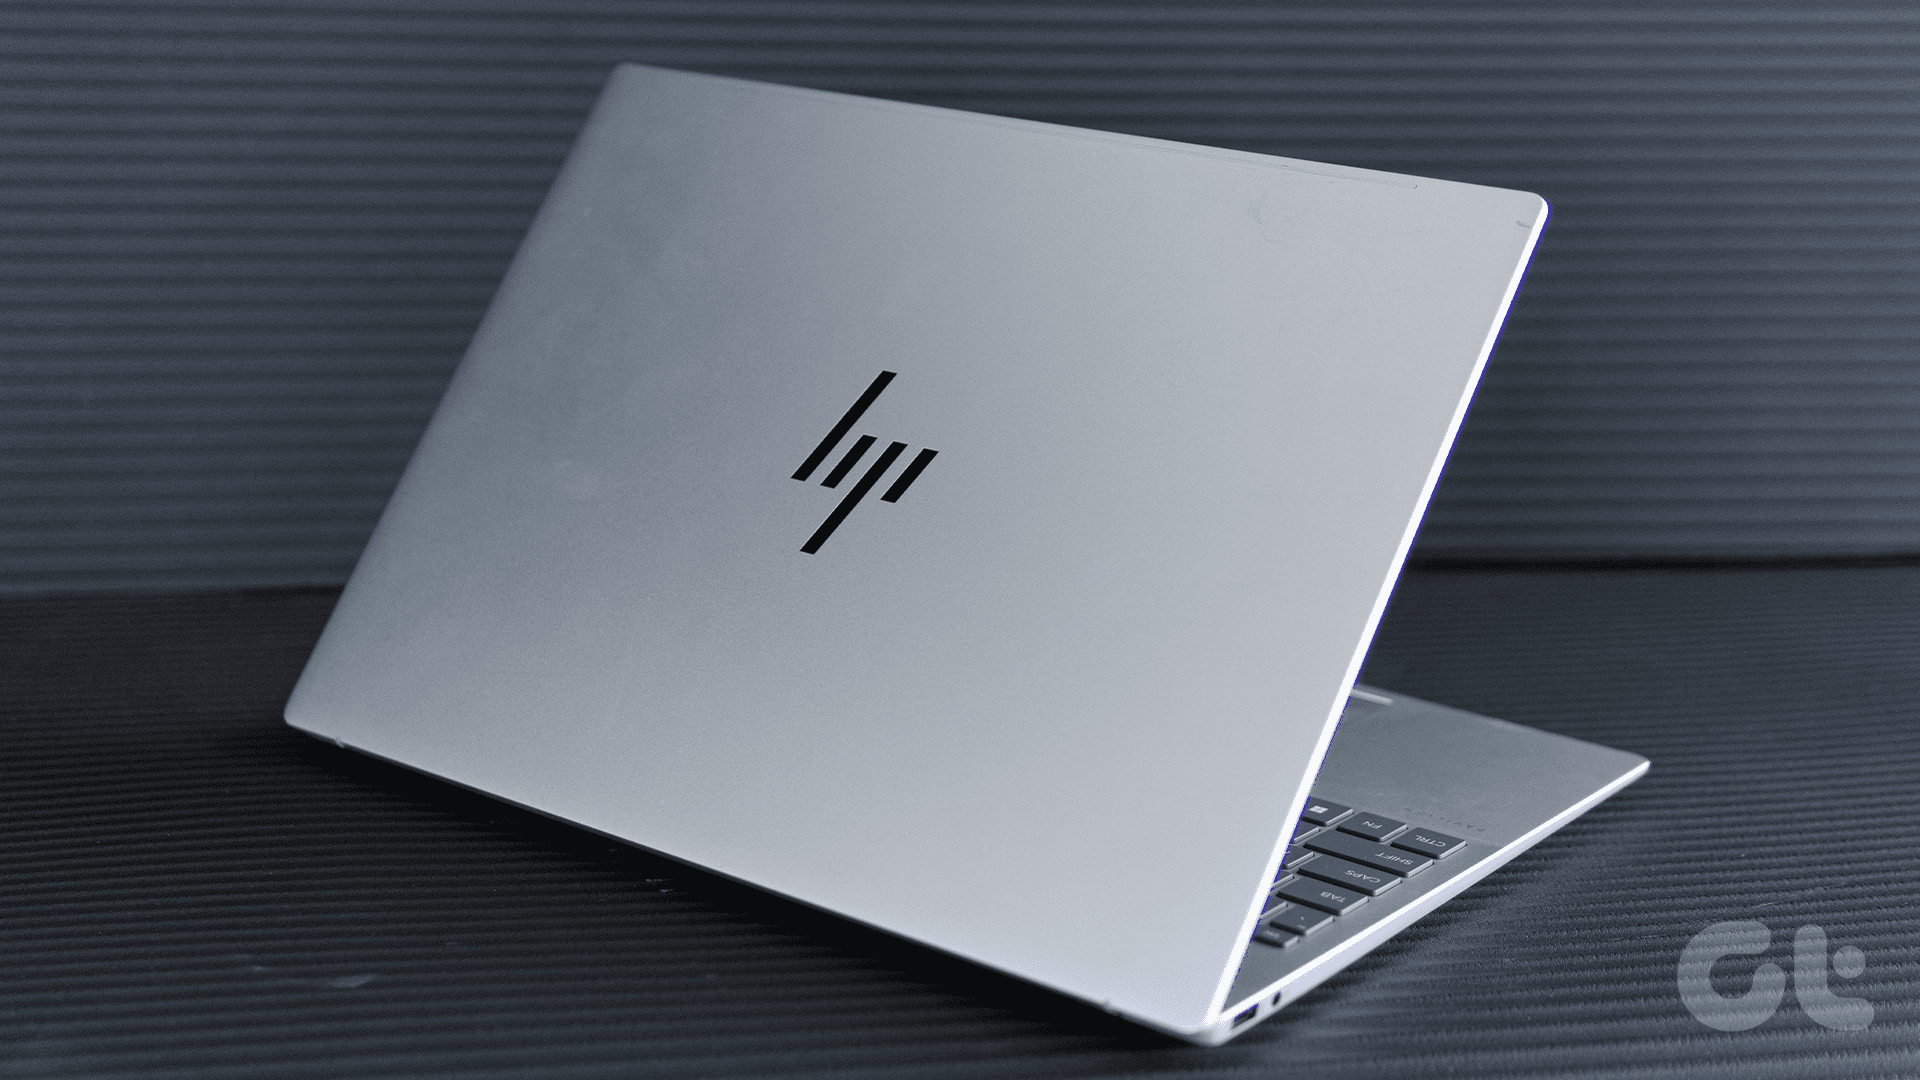 HP Pavilion Plus 16 Review: Work and Play Seamlessly